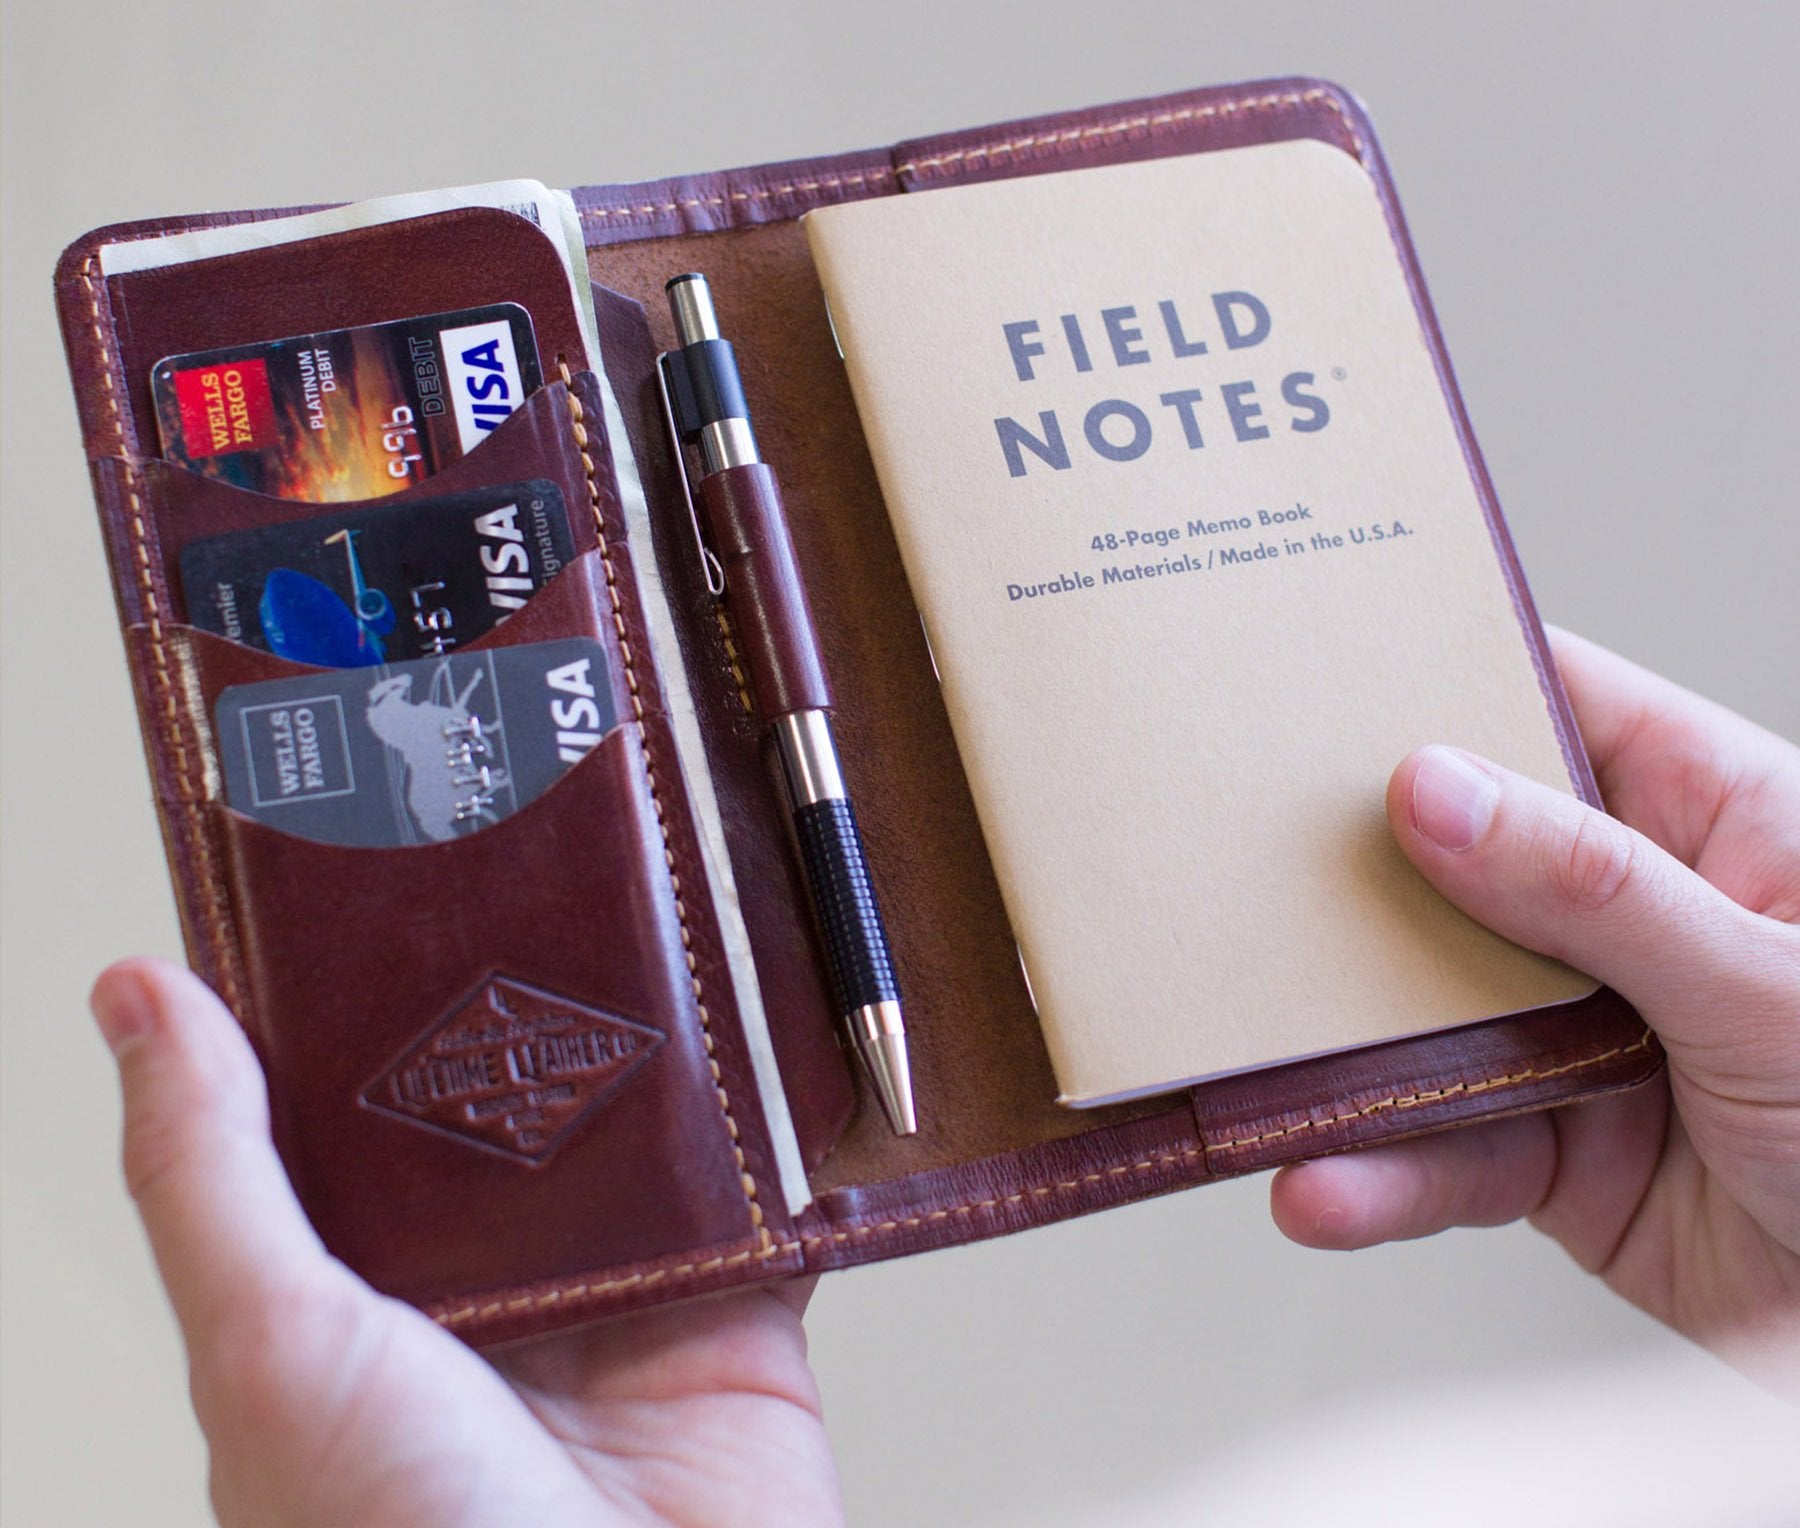 Rivet & Chain Journeyman Notebook Wallet — Tools and Toys